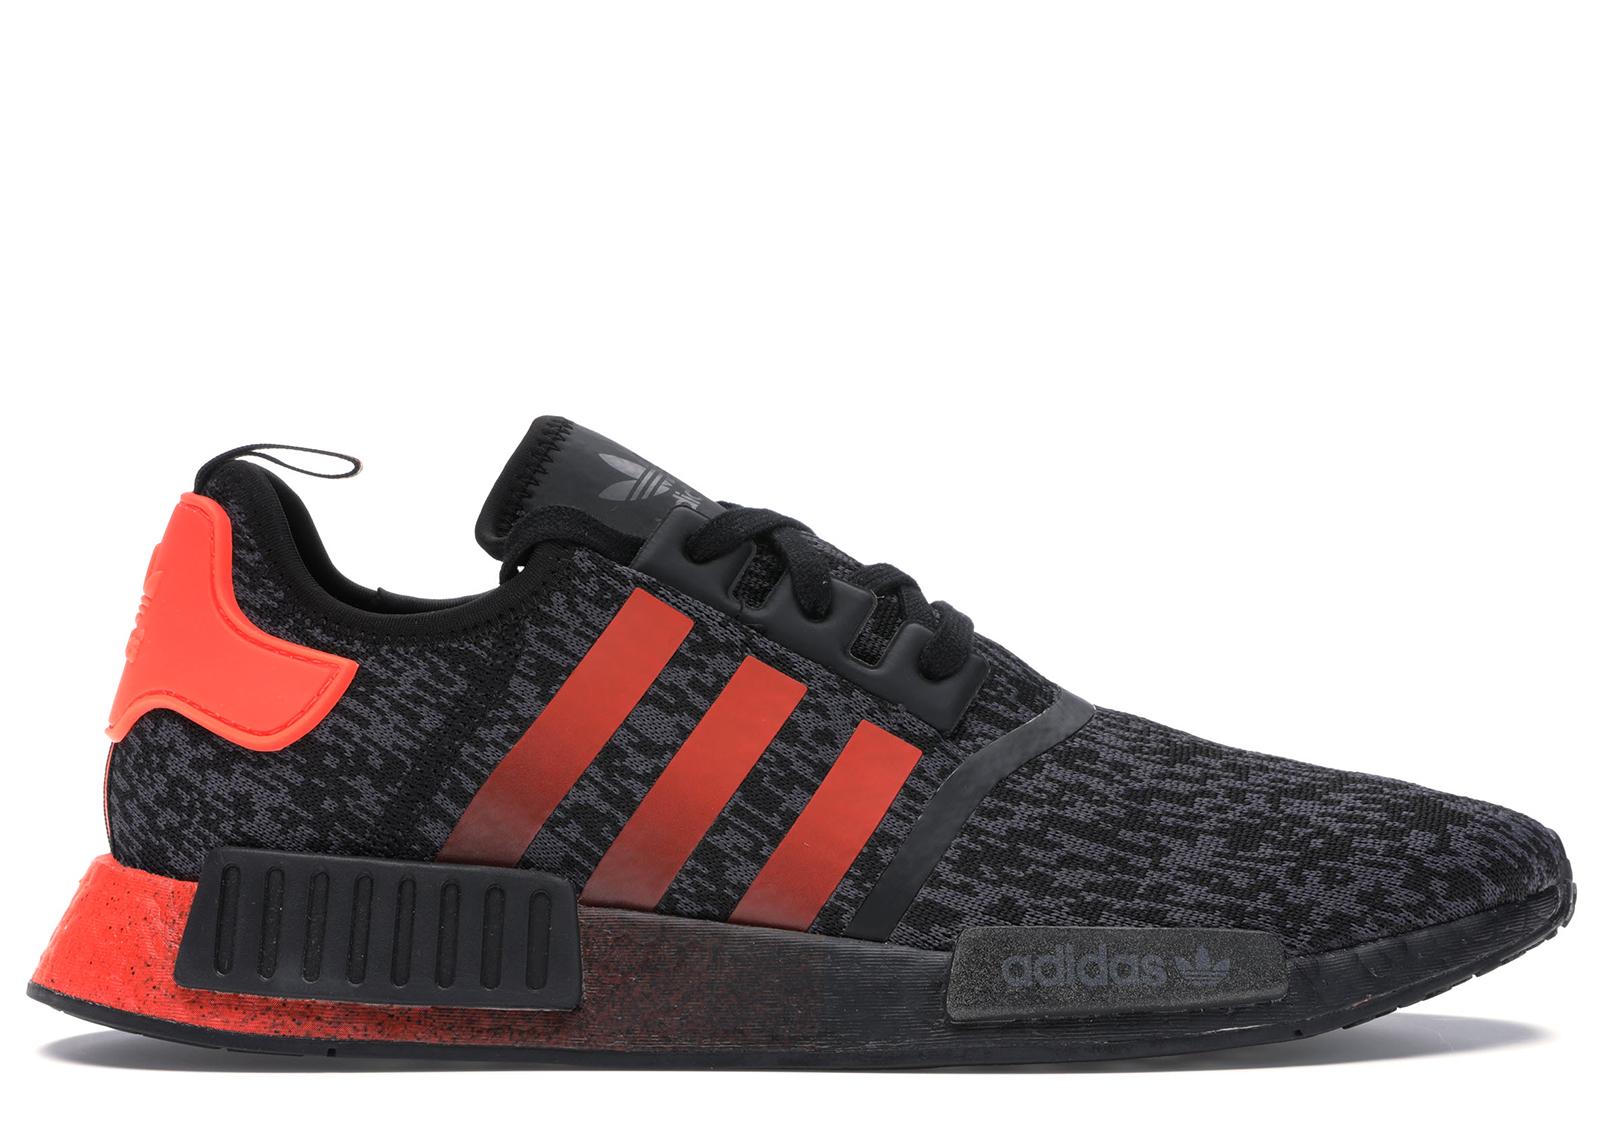 adidas red and black nmd